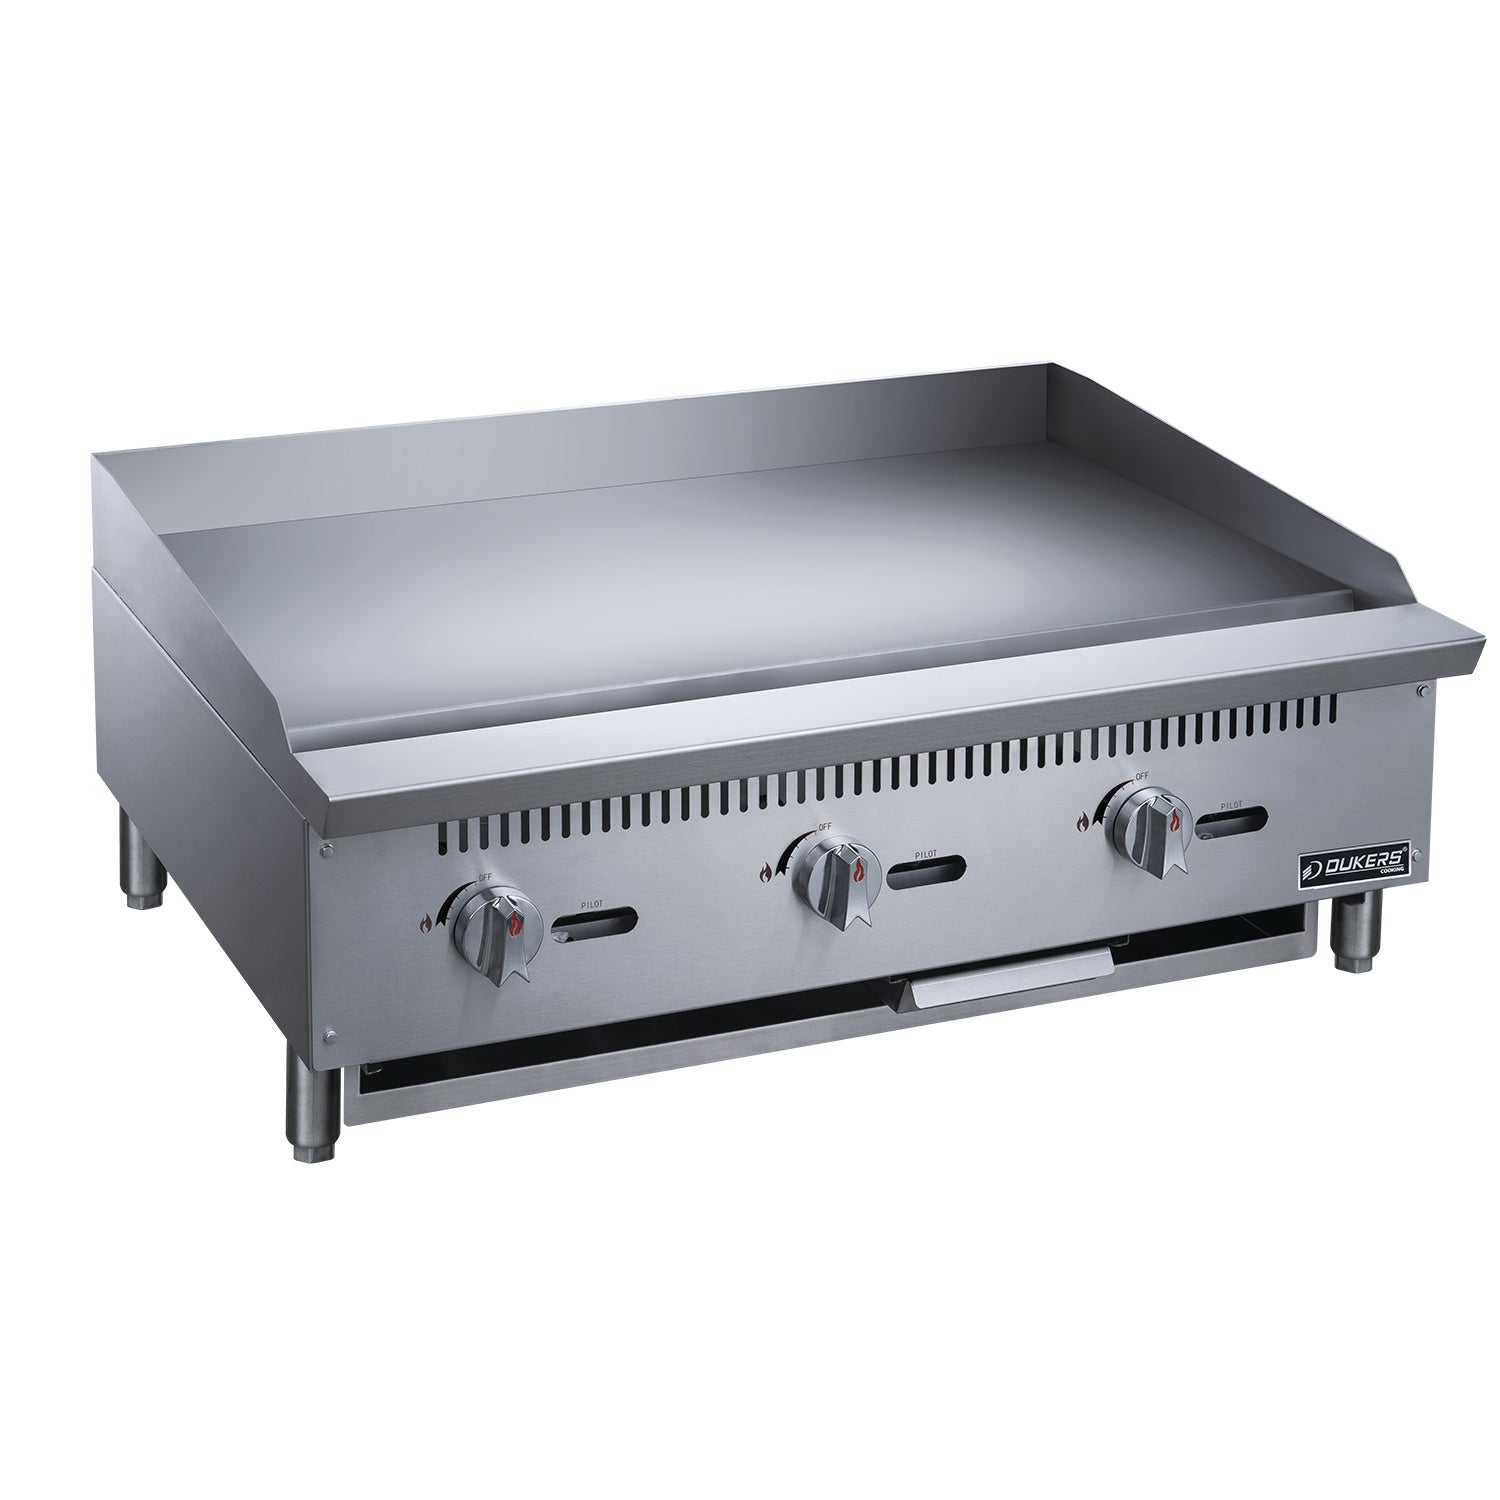 36" Griddler (24" Depth) 3-Burner Commercial Griddle in Stainless Steel with 4 legs, isolated on a white background.